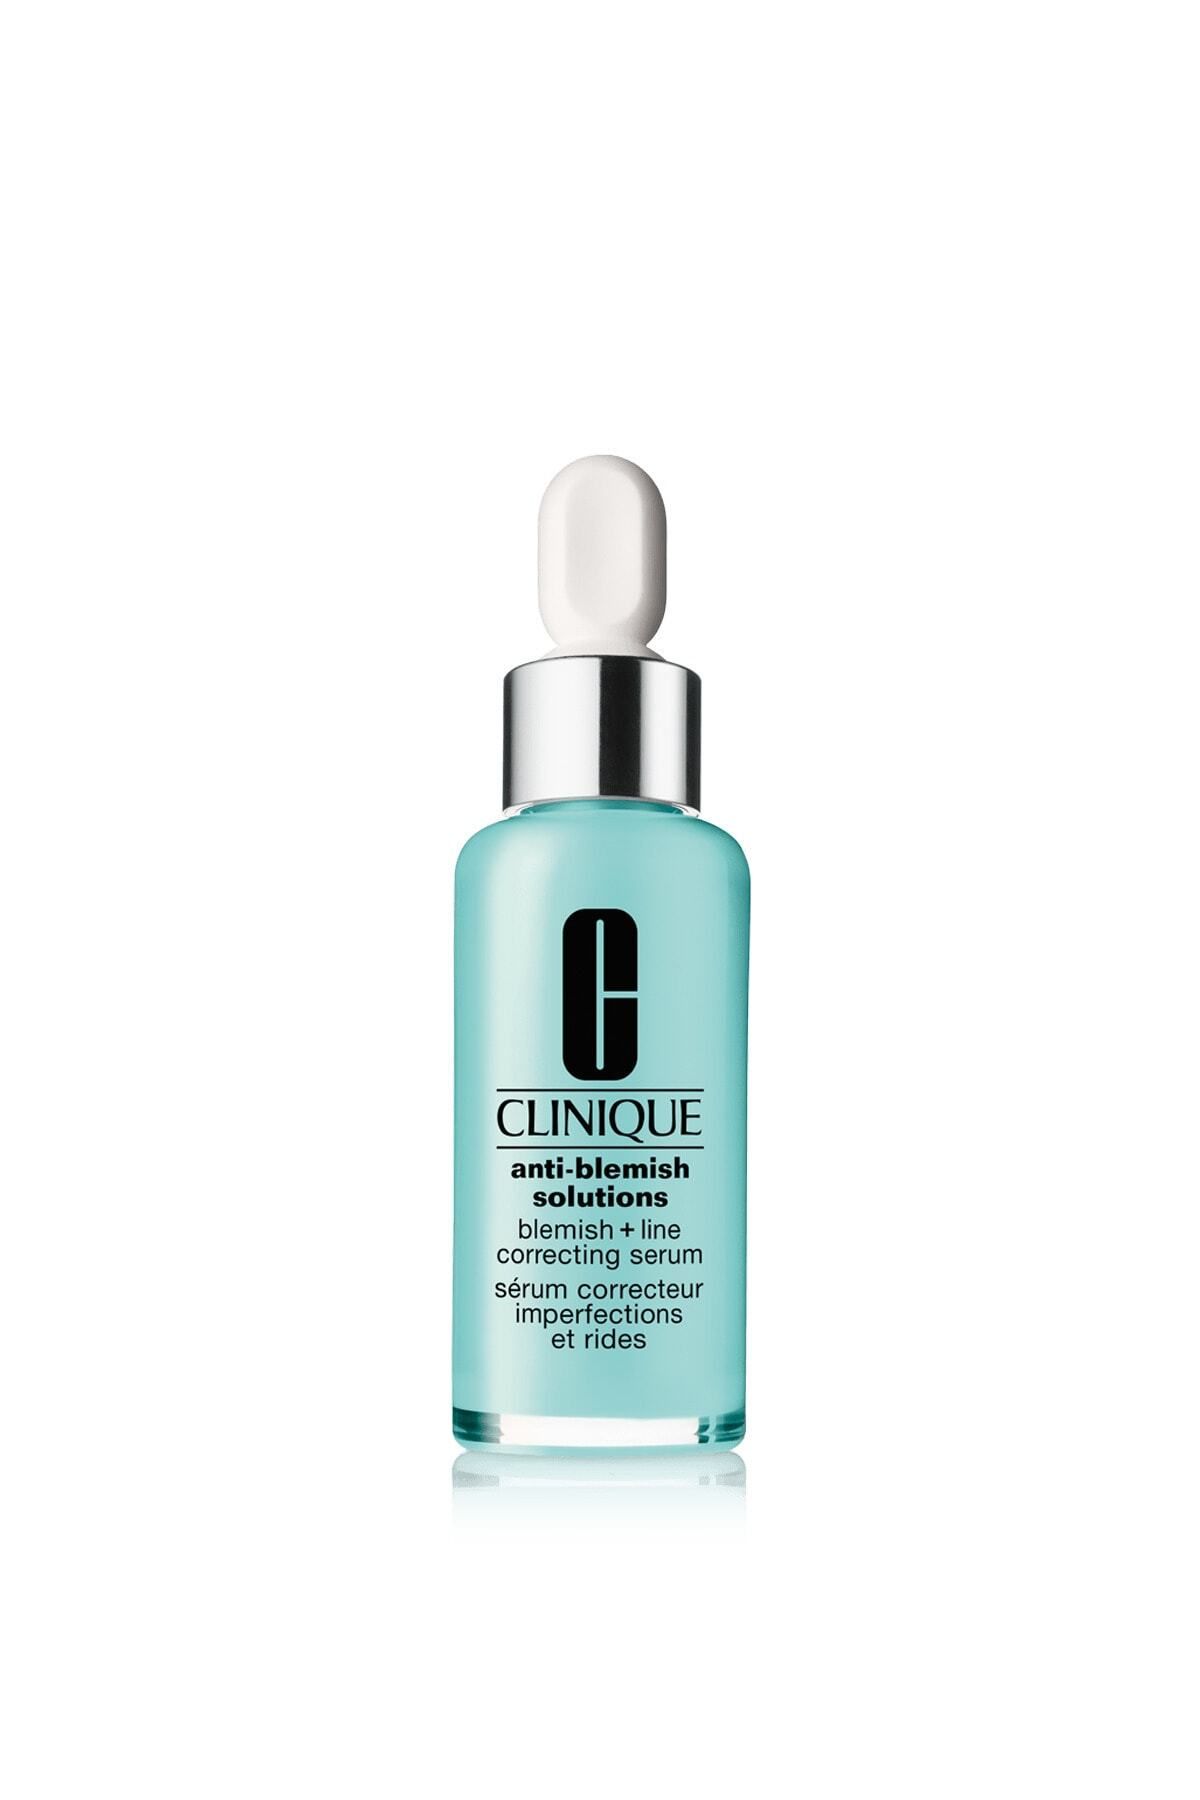 Clinique ACNE AND WRİNKLE ANTİ-BLEMİSH RENEWİNG SKİN CARE SERUM 30ML DKÜRN887